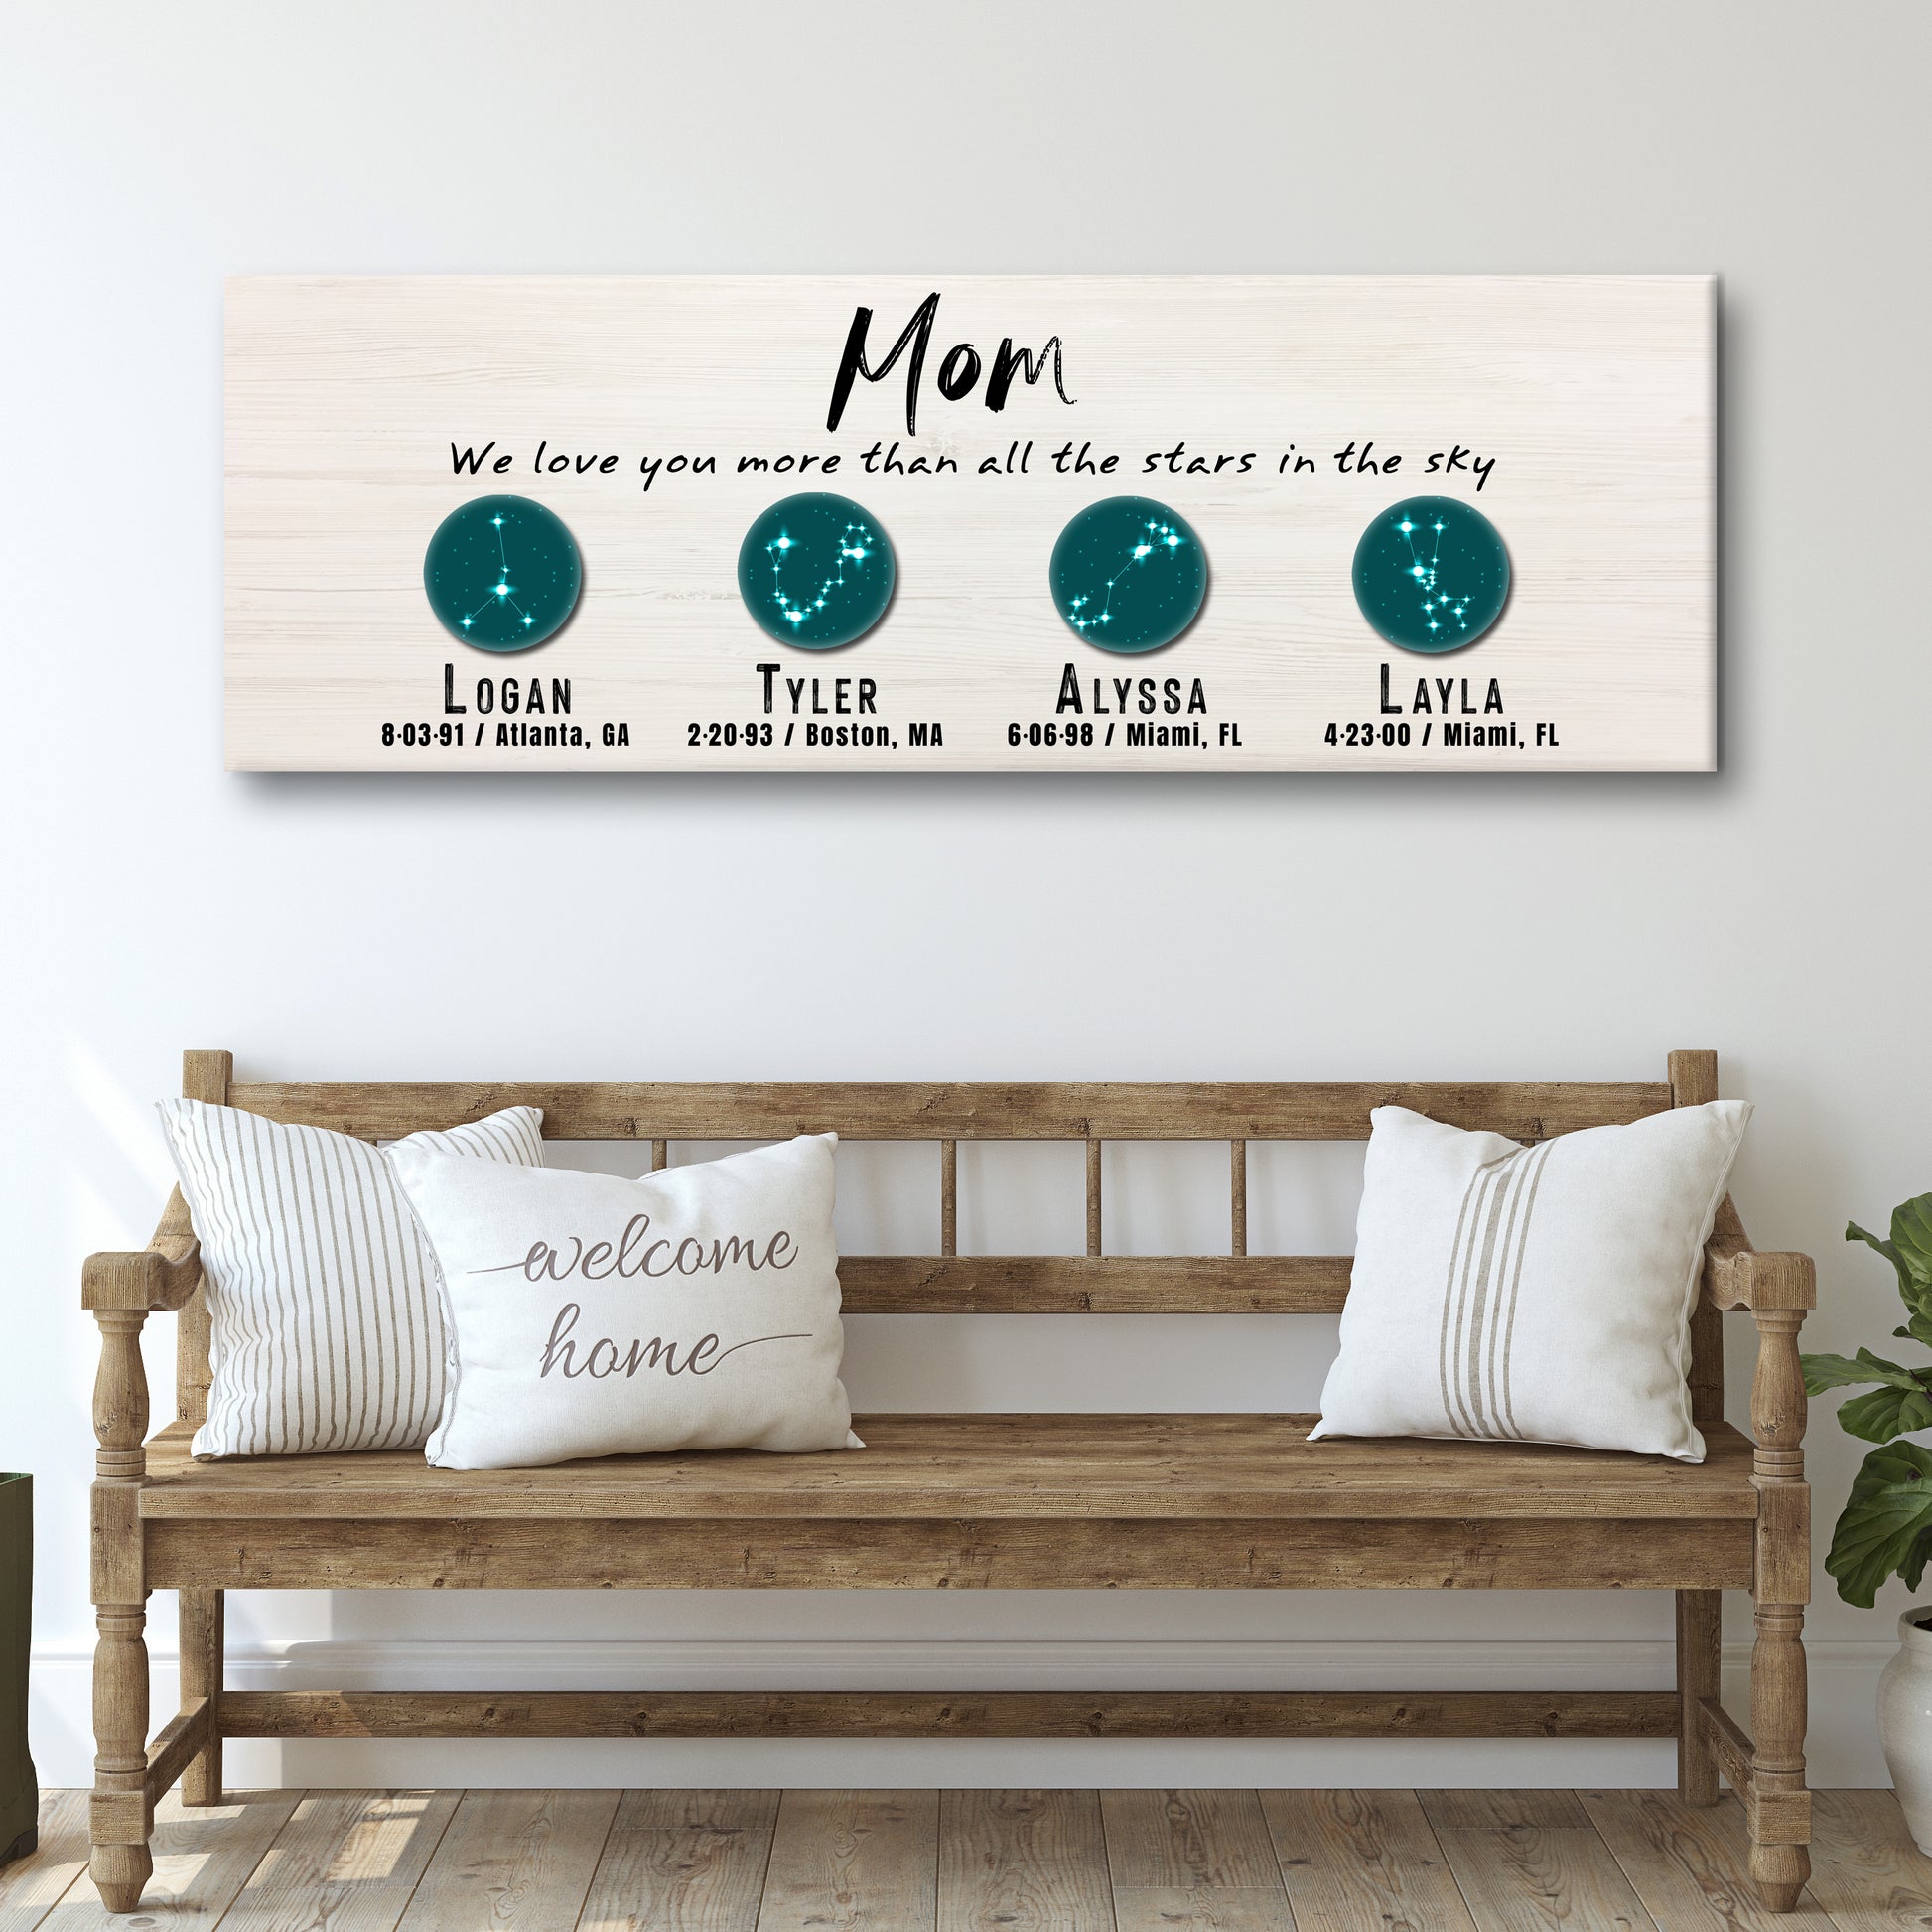 We Love You More than the stars, MOM Sign Style 1 - Image by Tailored Canvases